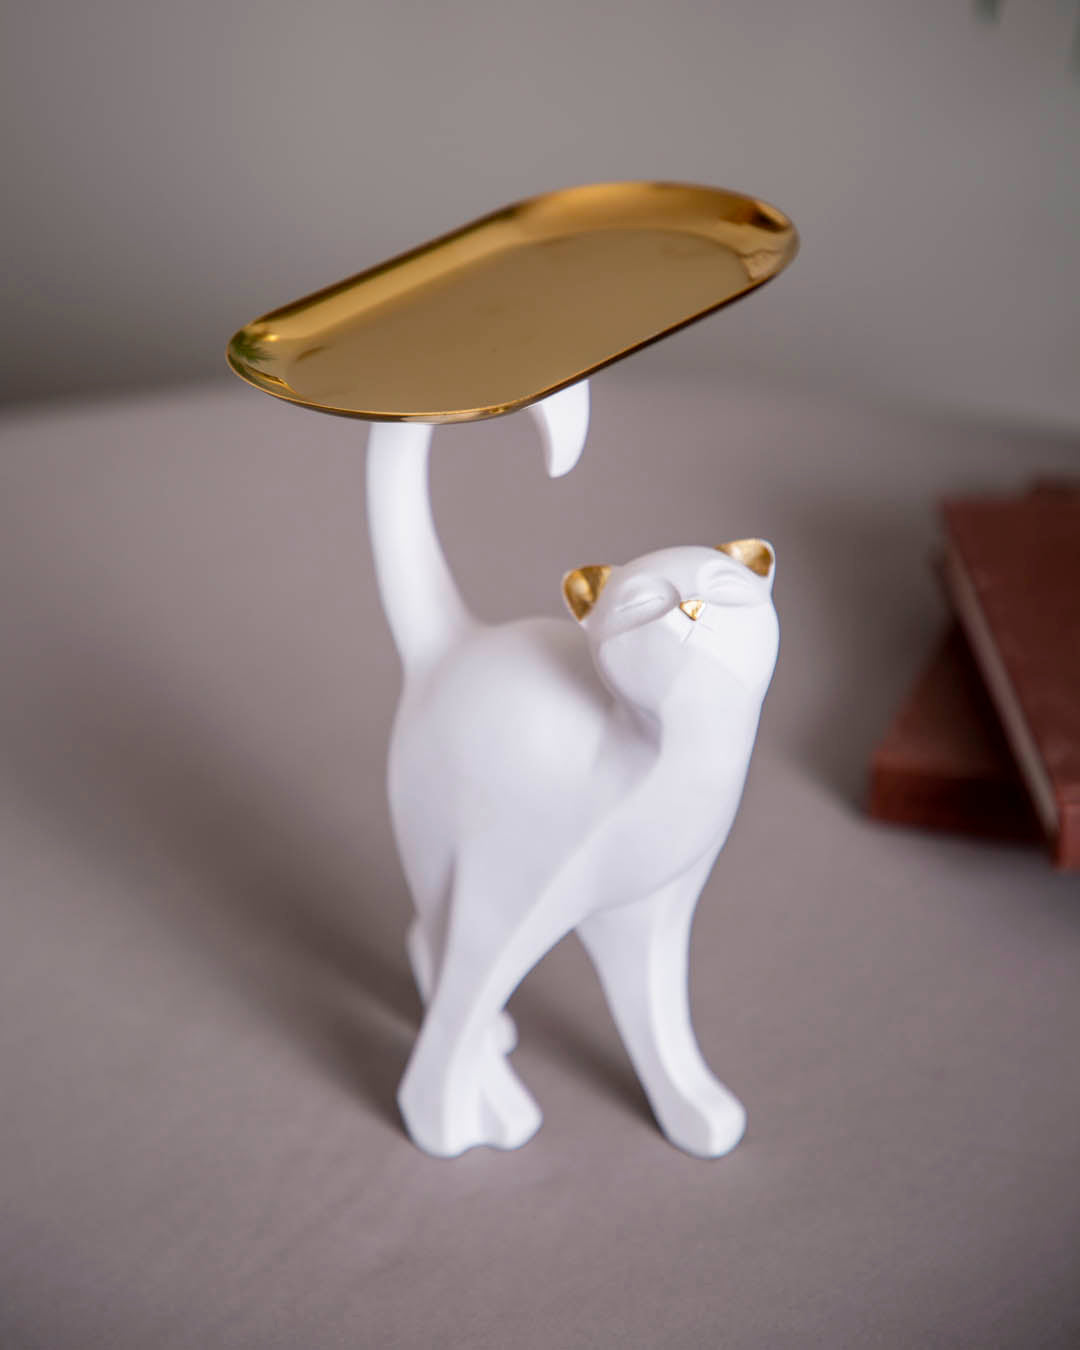 The Tray-Tailed Cat Sculpture - II